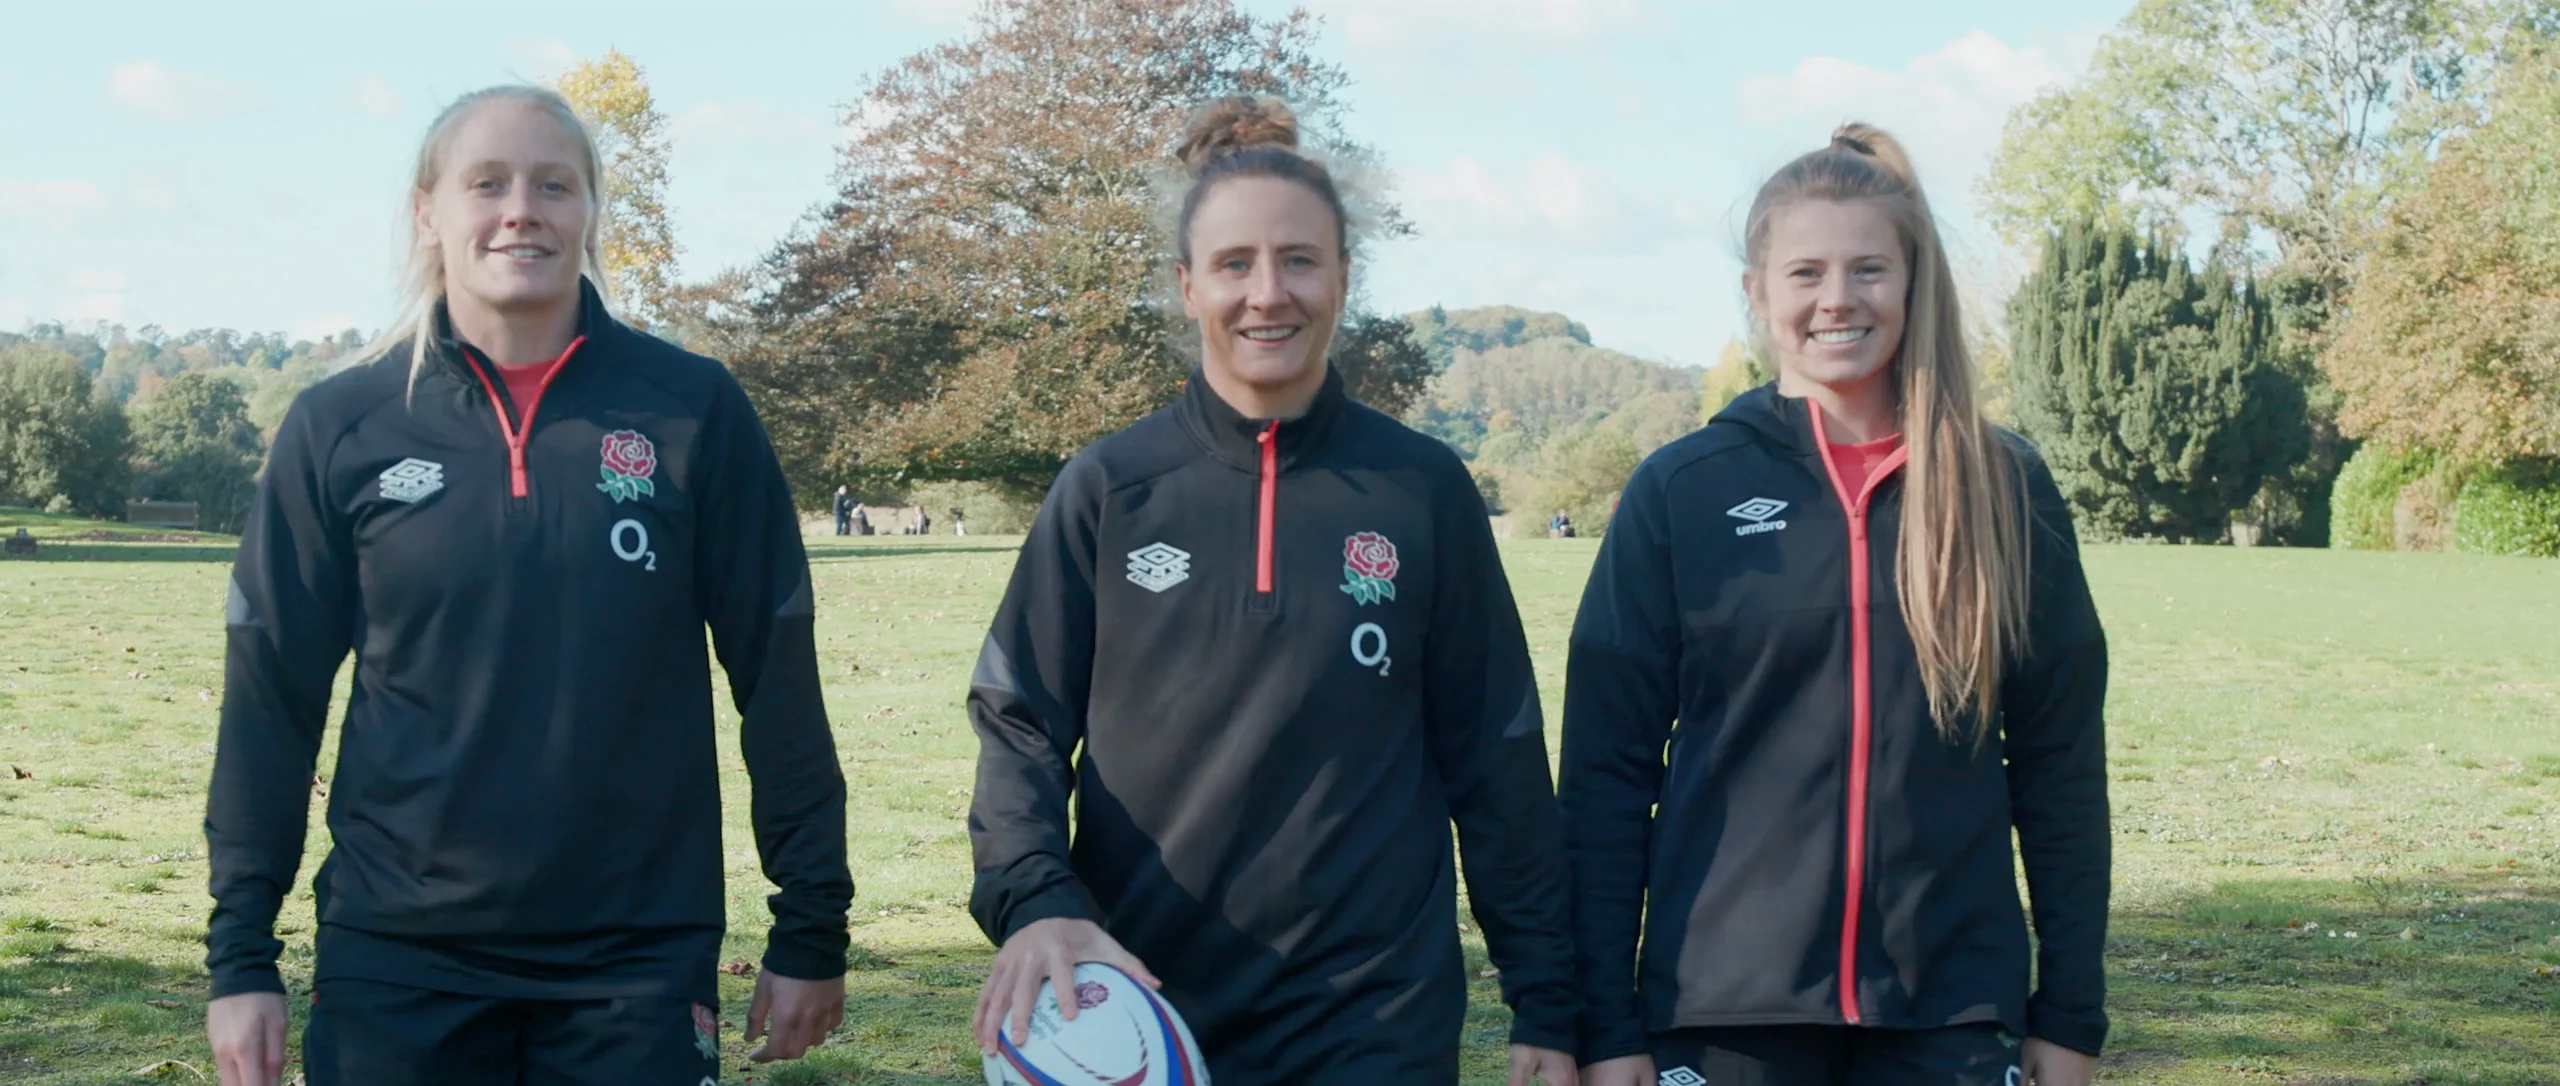 Three members of the Red Roses rugby team walking across a field.